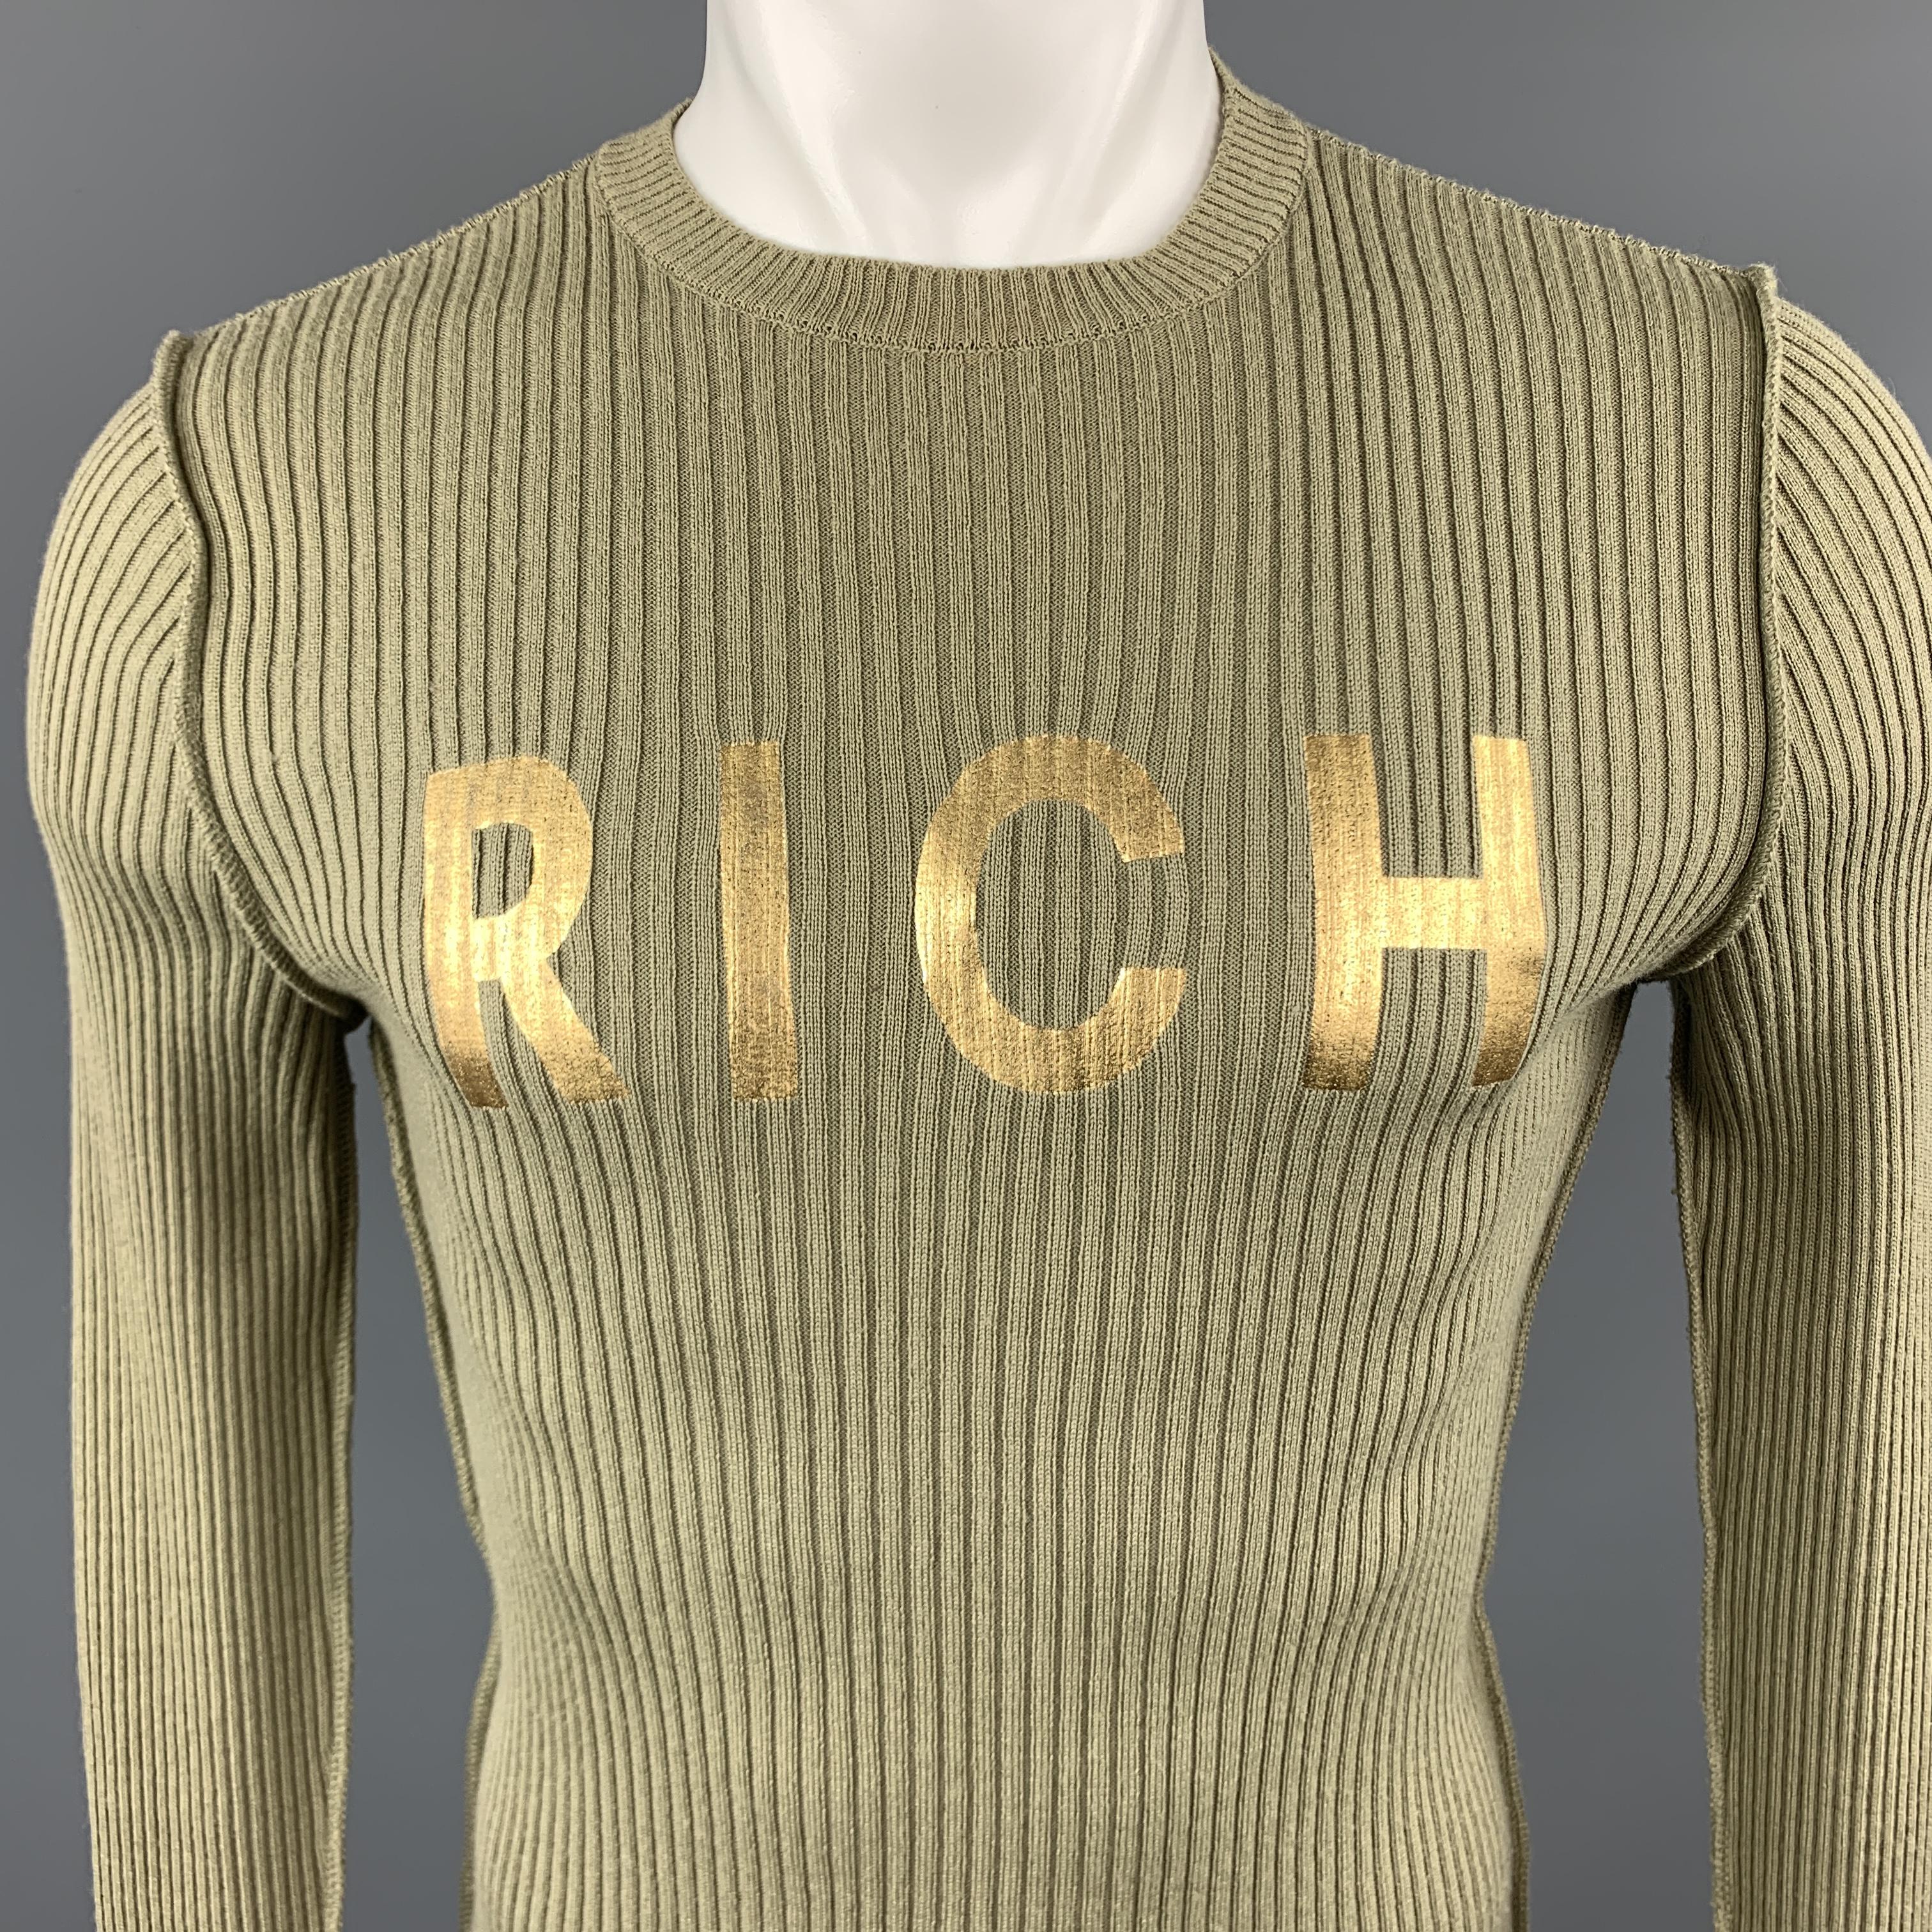 JOHN RICHMOND - RICHMOND DENIM Pullover Sweater comes in an olive tone in a ribbed knit wool blend material, with a crewneck, a 